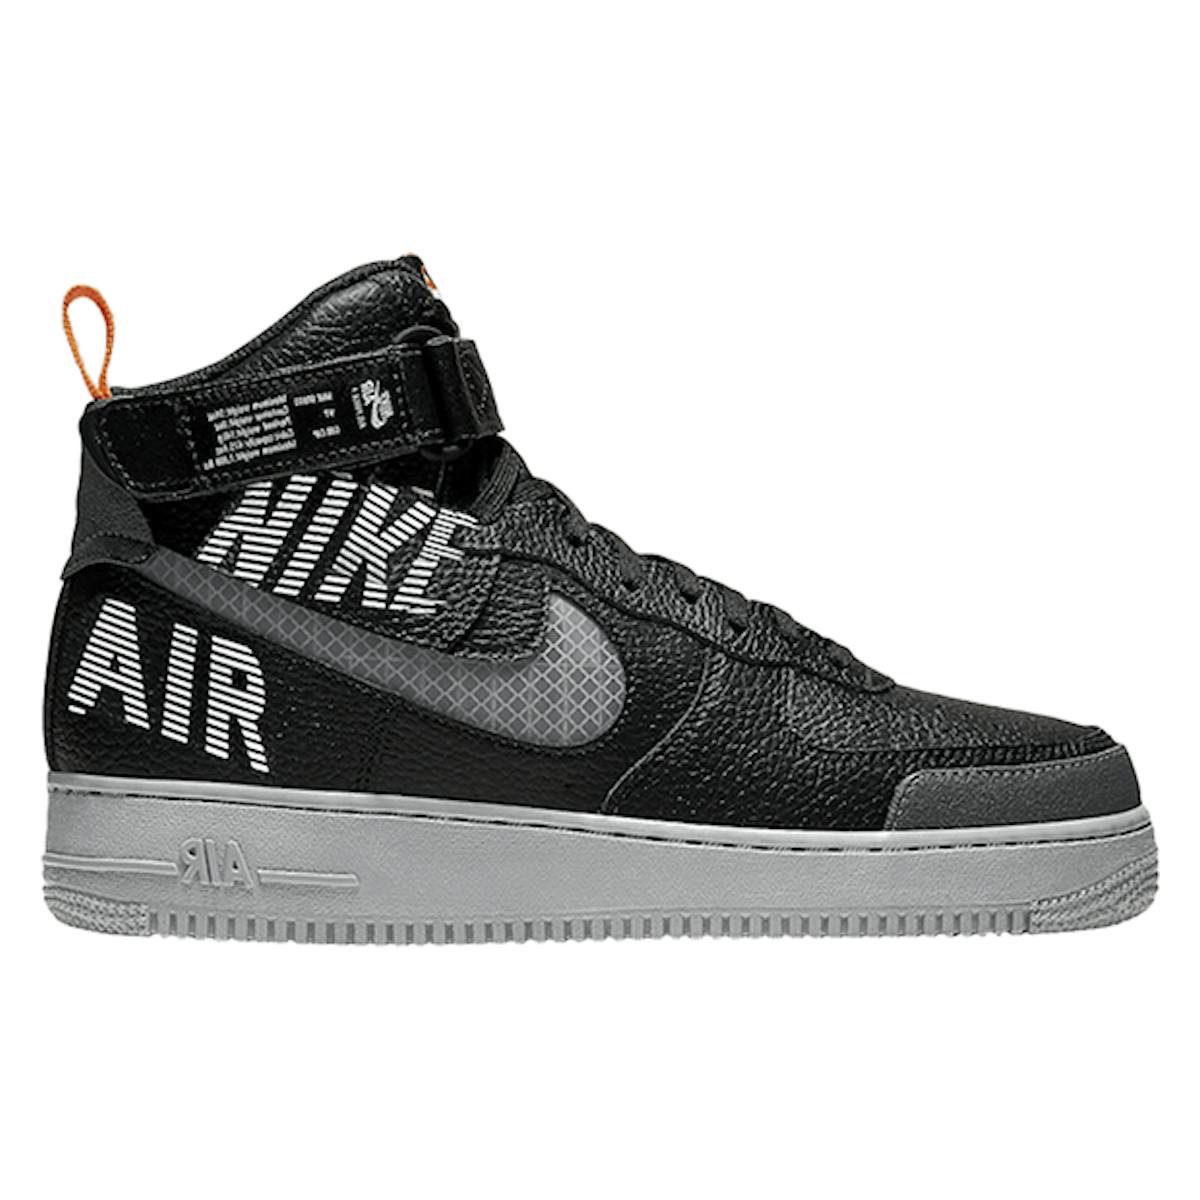 Nike Air Force 1 High "Under Construction - Black"